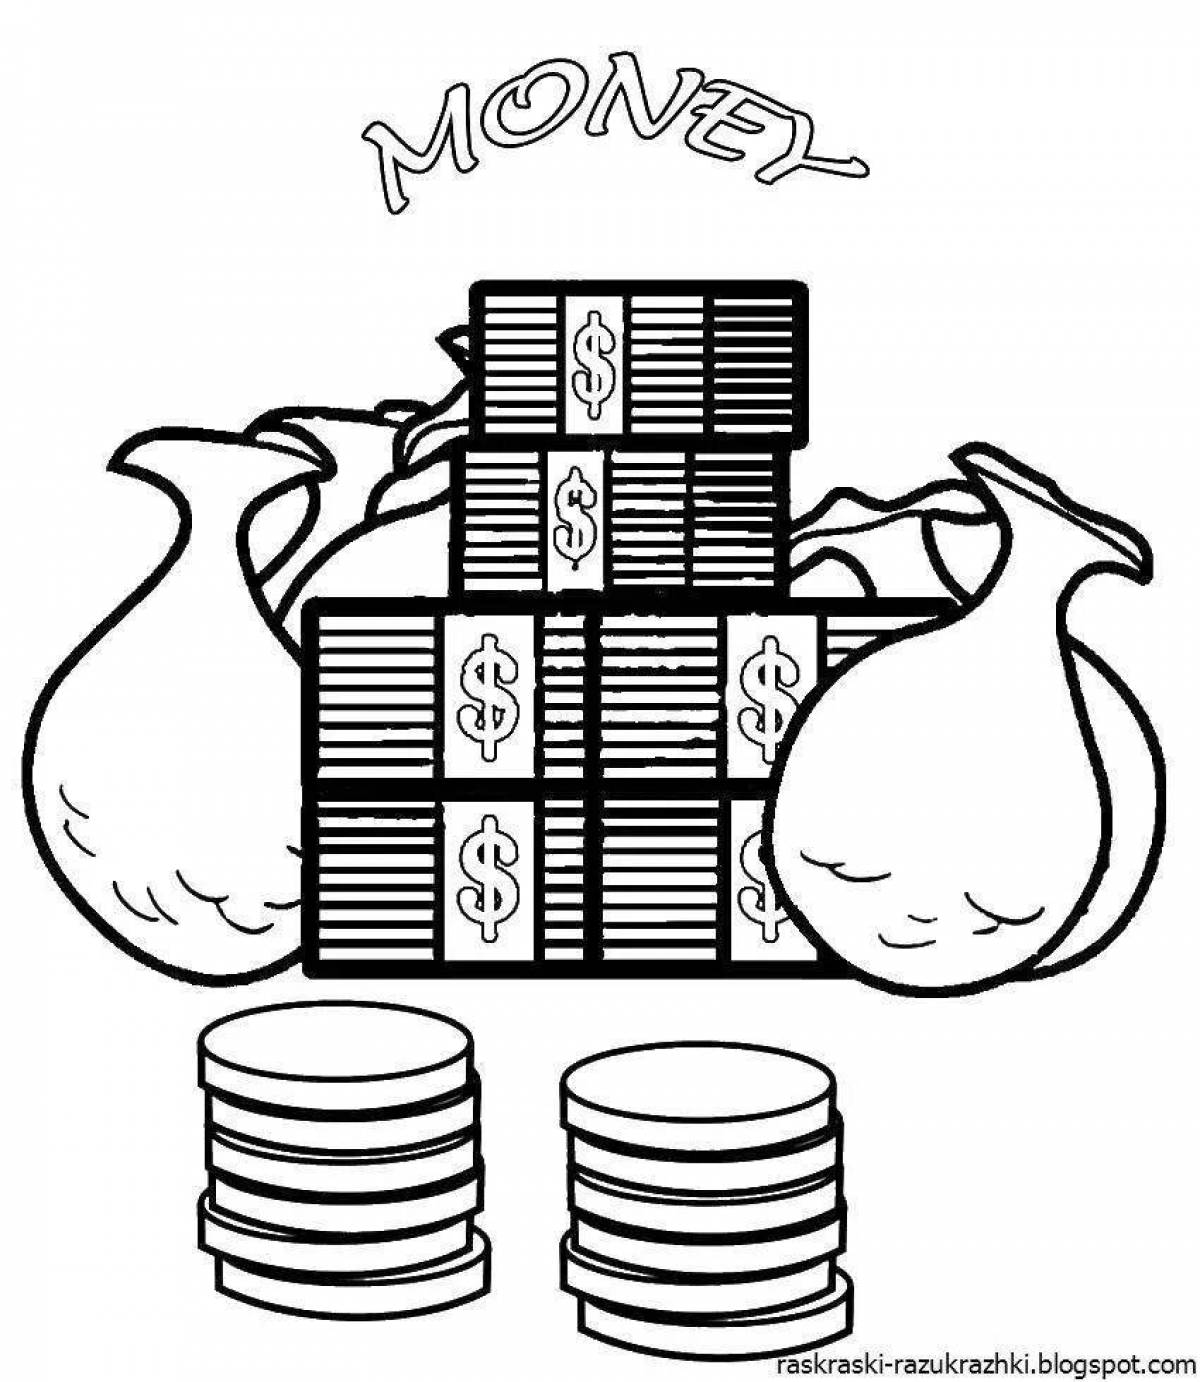 Animated money - small coloring book